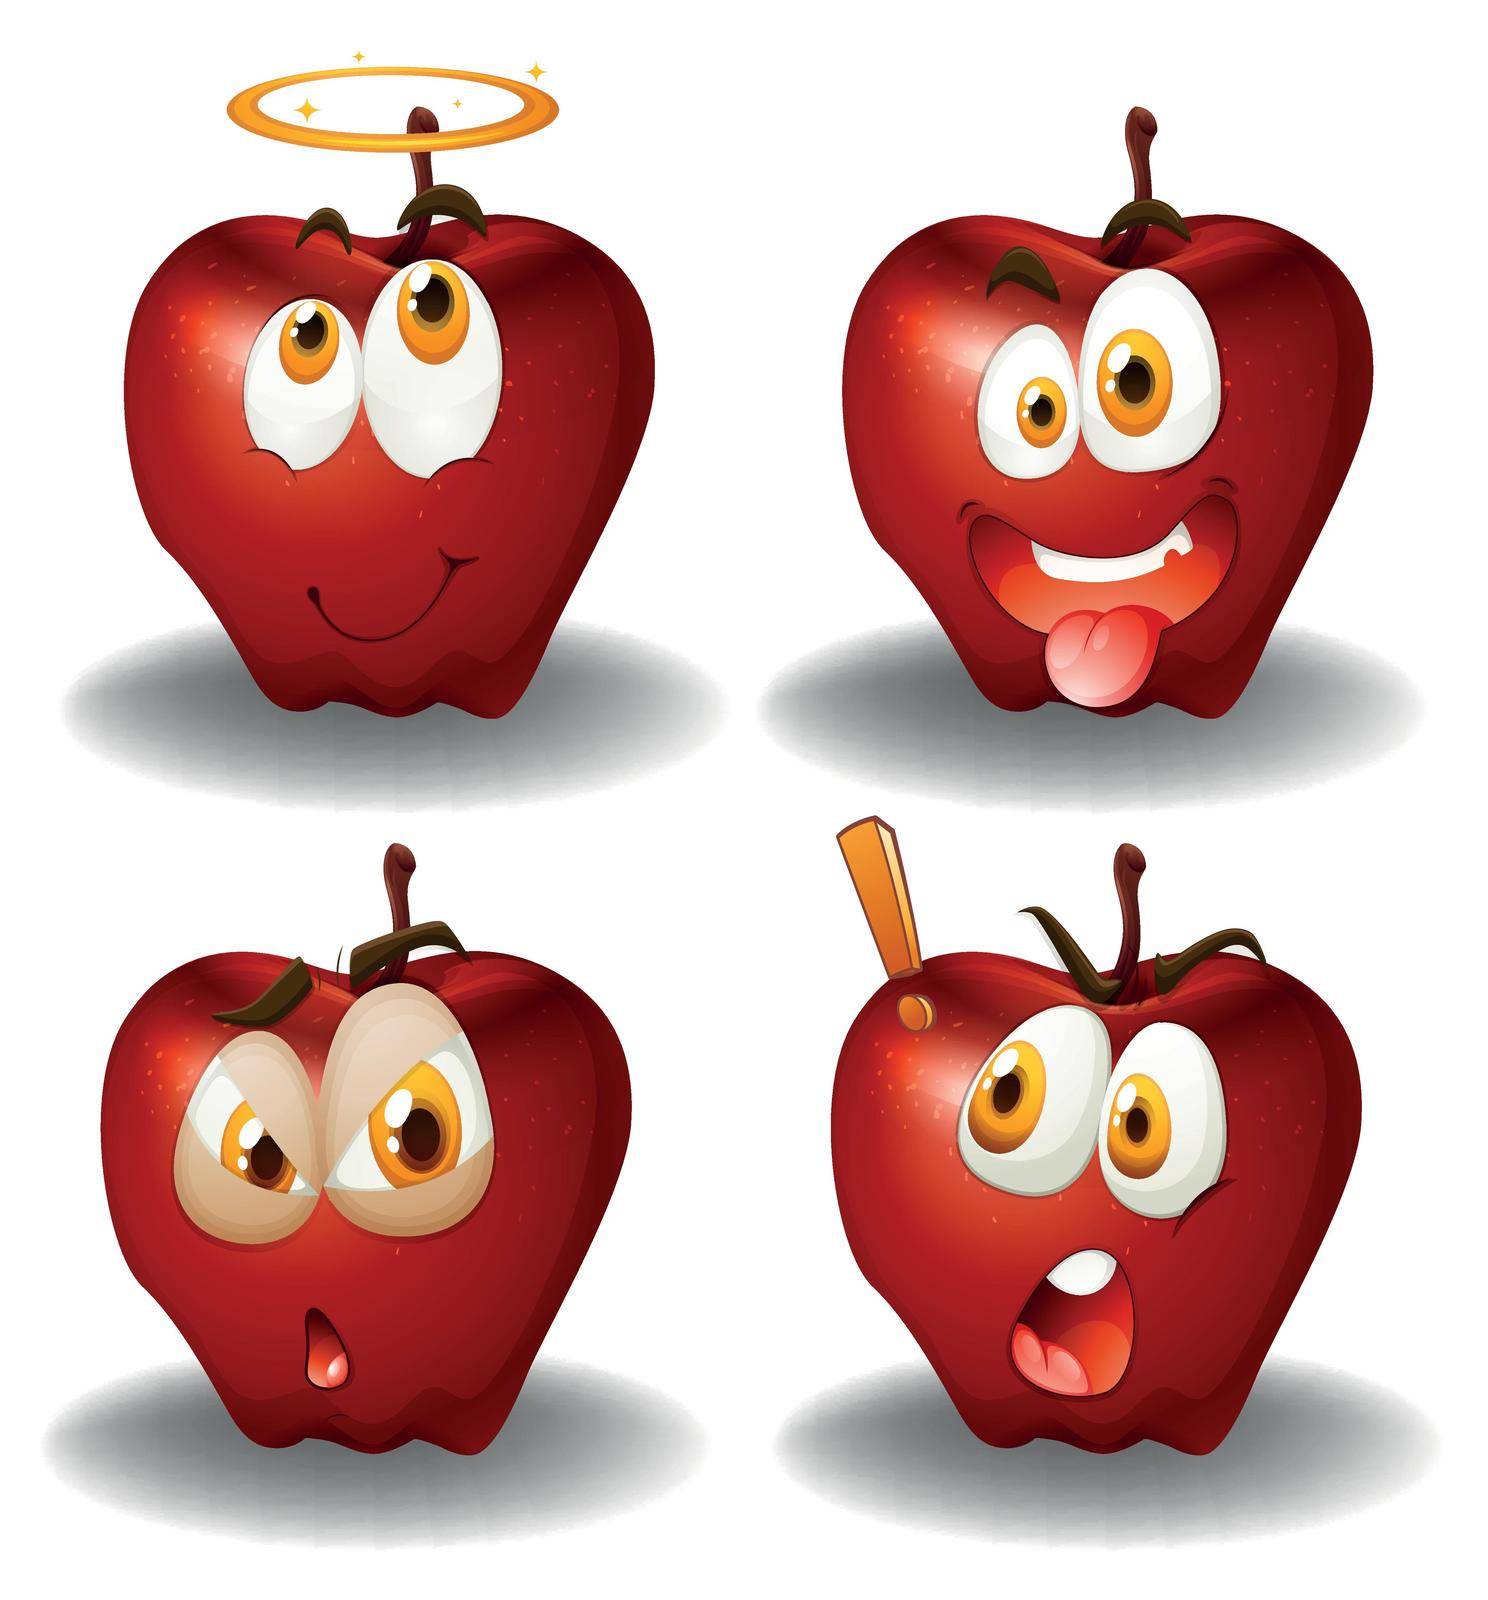 Facial expression on apples illustration